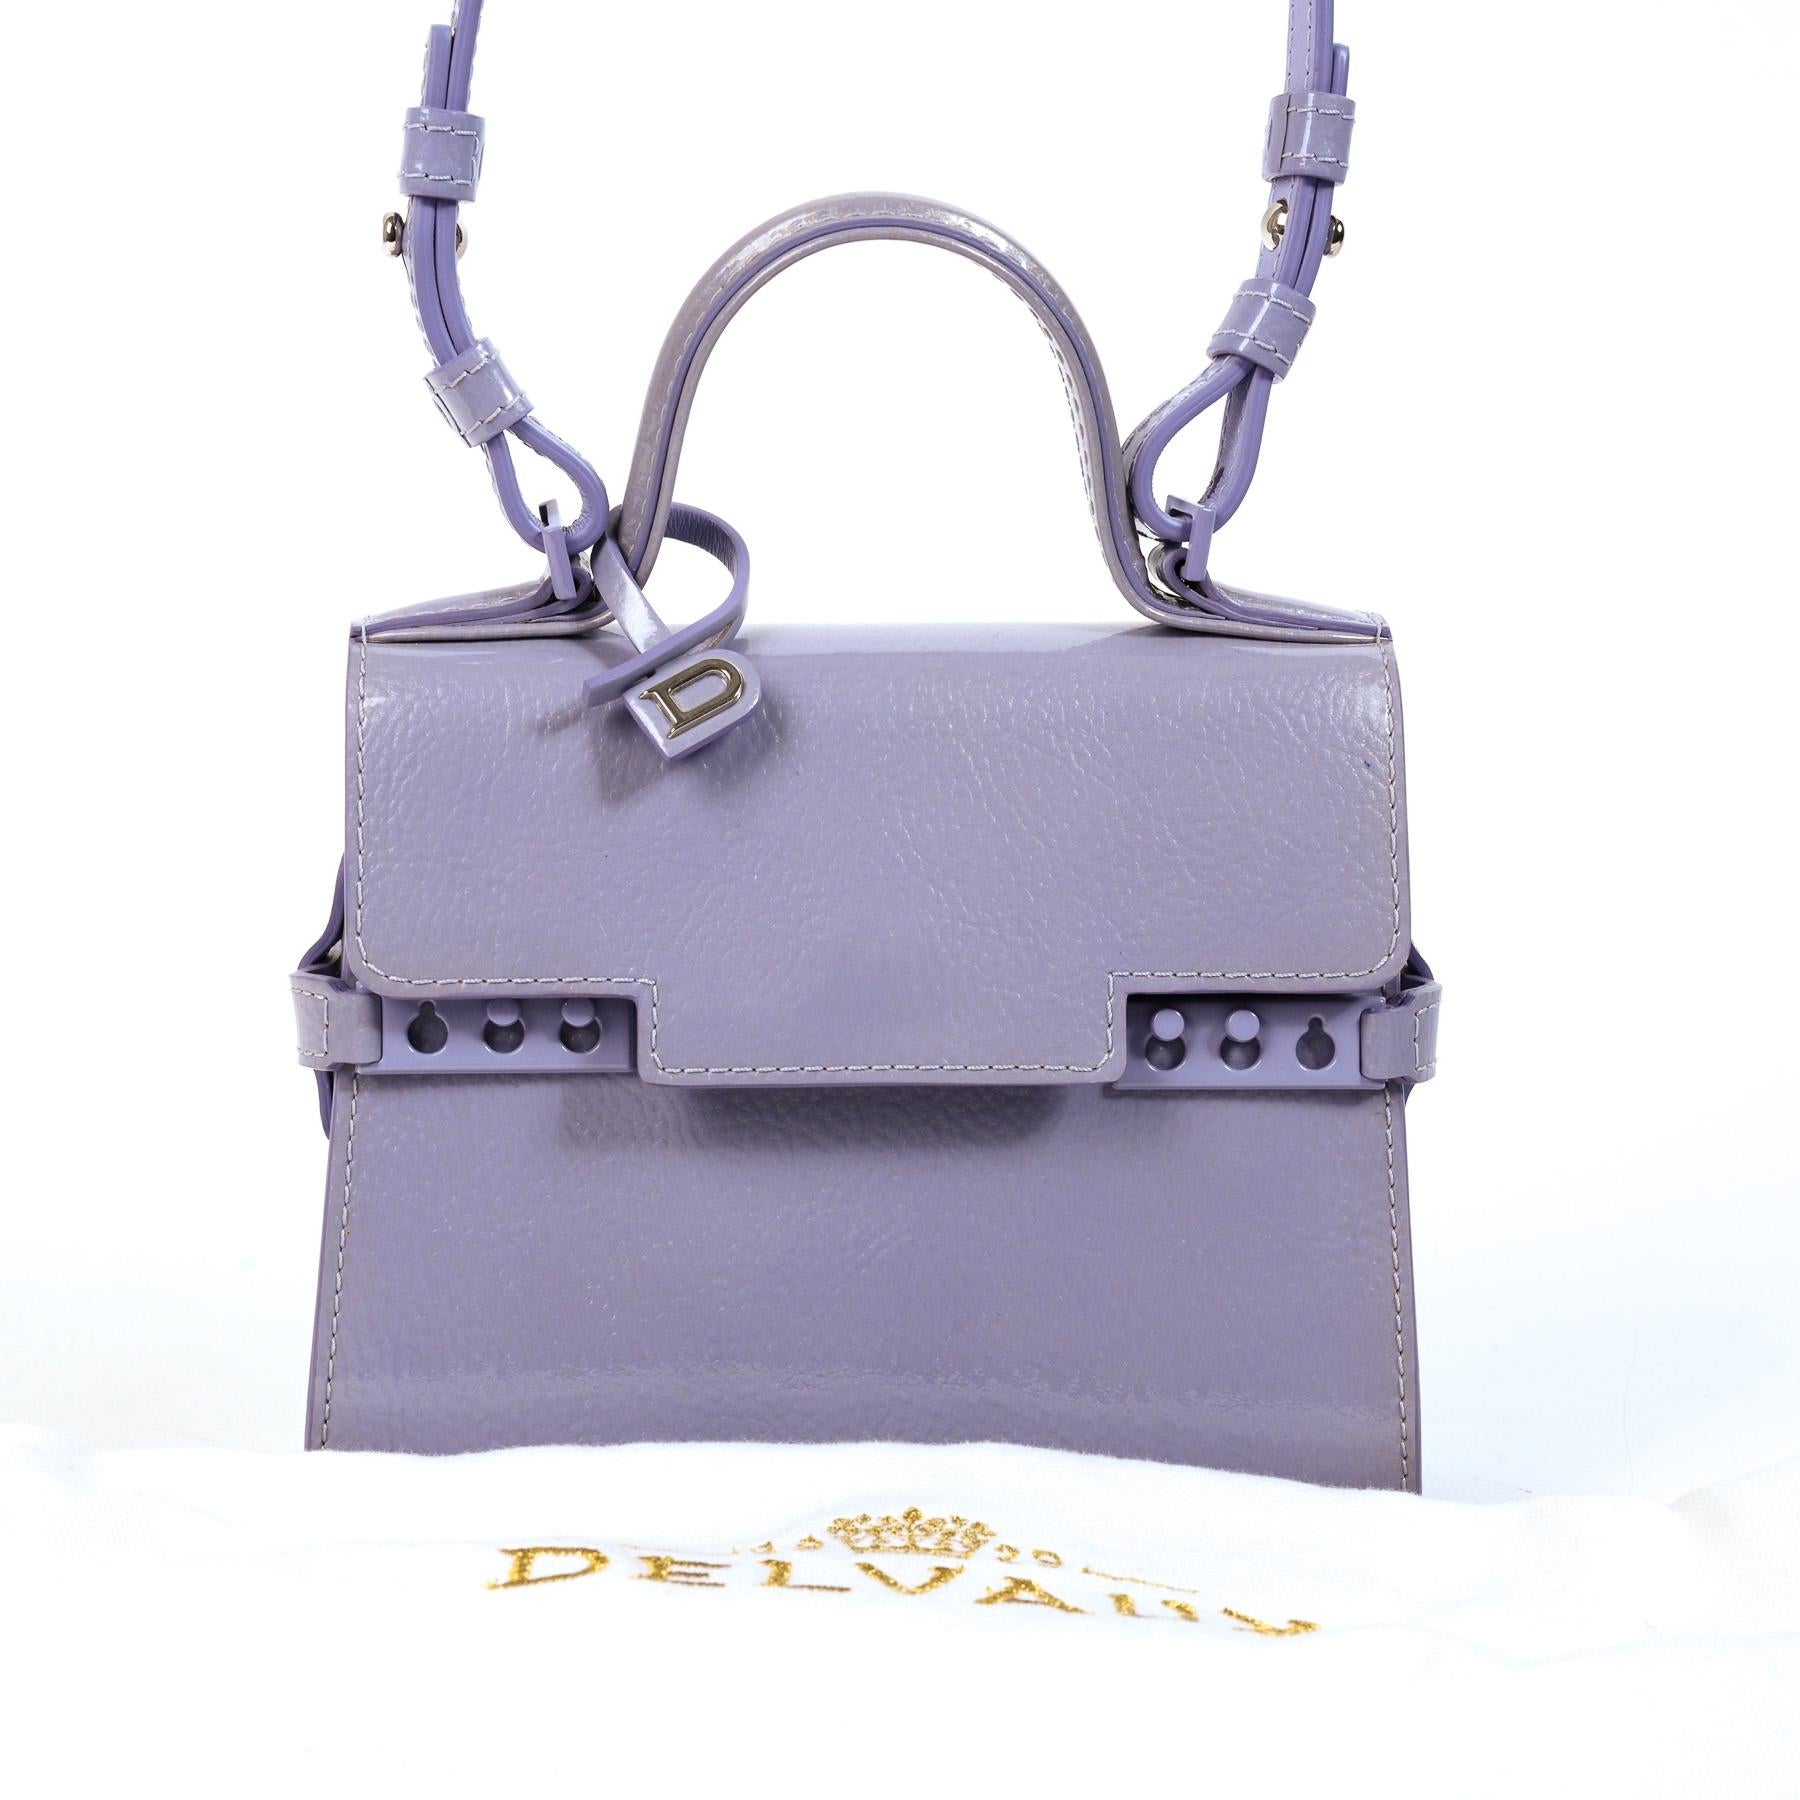 Delvaux Tempete GM Framboise For Sale at 1stDibs  delvaux tempete size, delvaux  tempete mm size, tempete delvaux